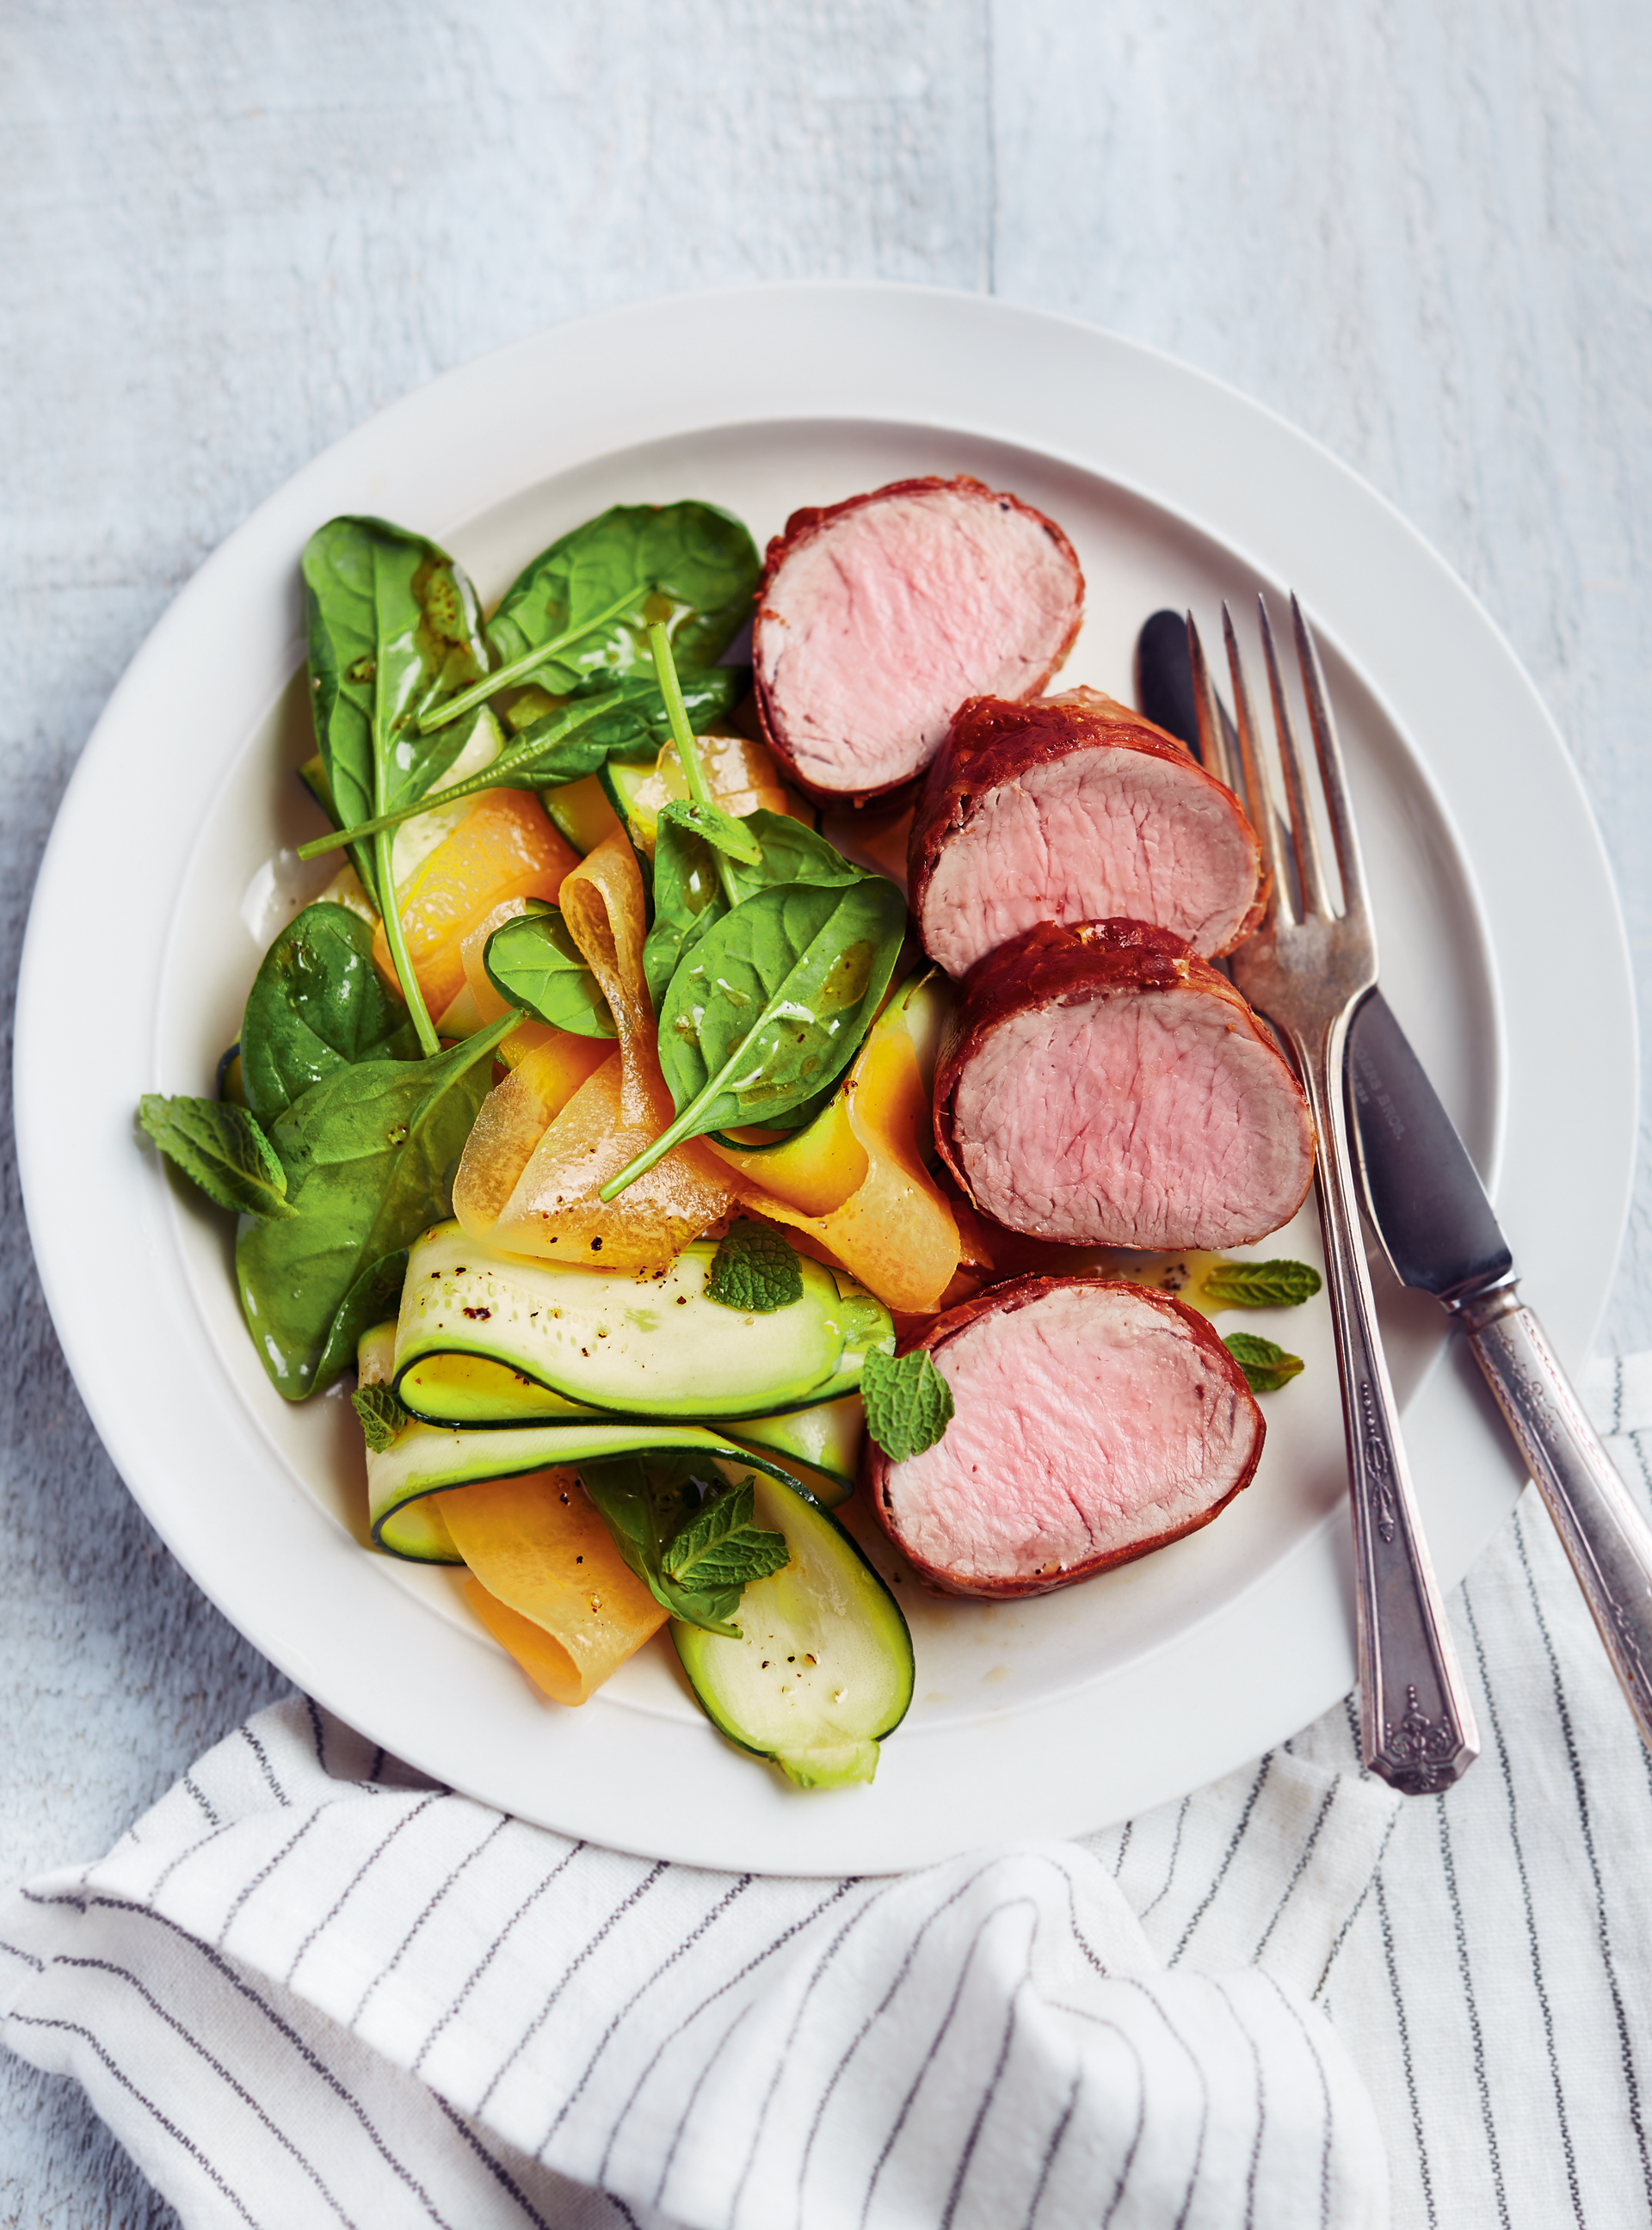 Pork and Prosciutto Medallions with Zucchini-Mint Salad